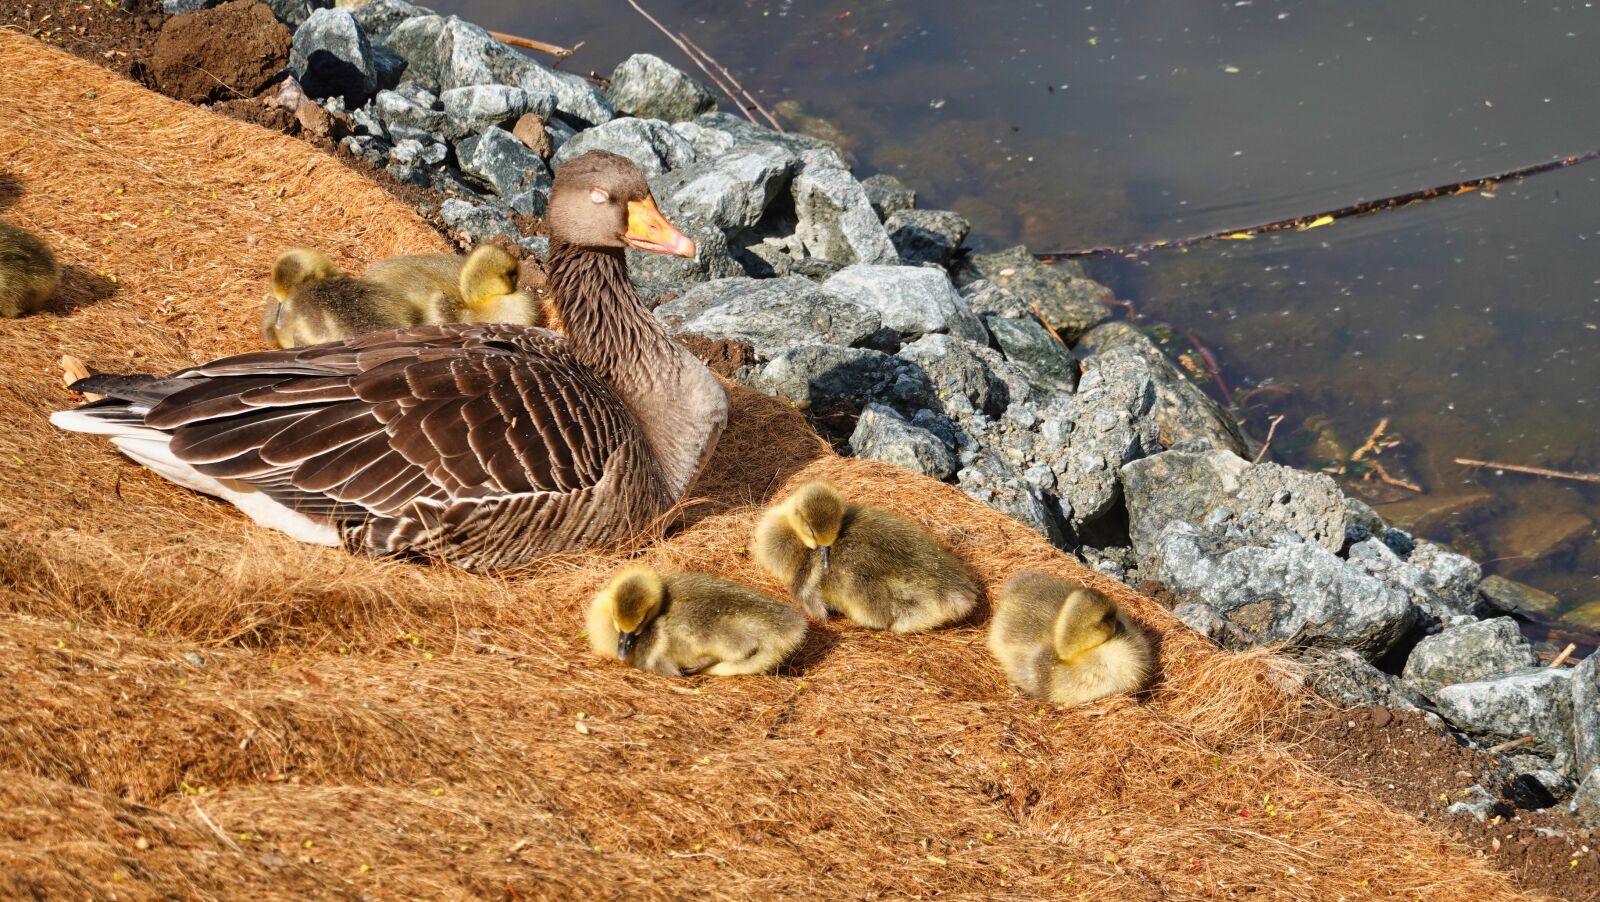 Sony DSC-RX100M7 sample photo. Greylag goose, young, graugans photography